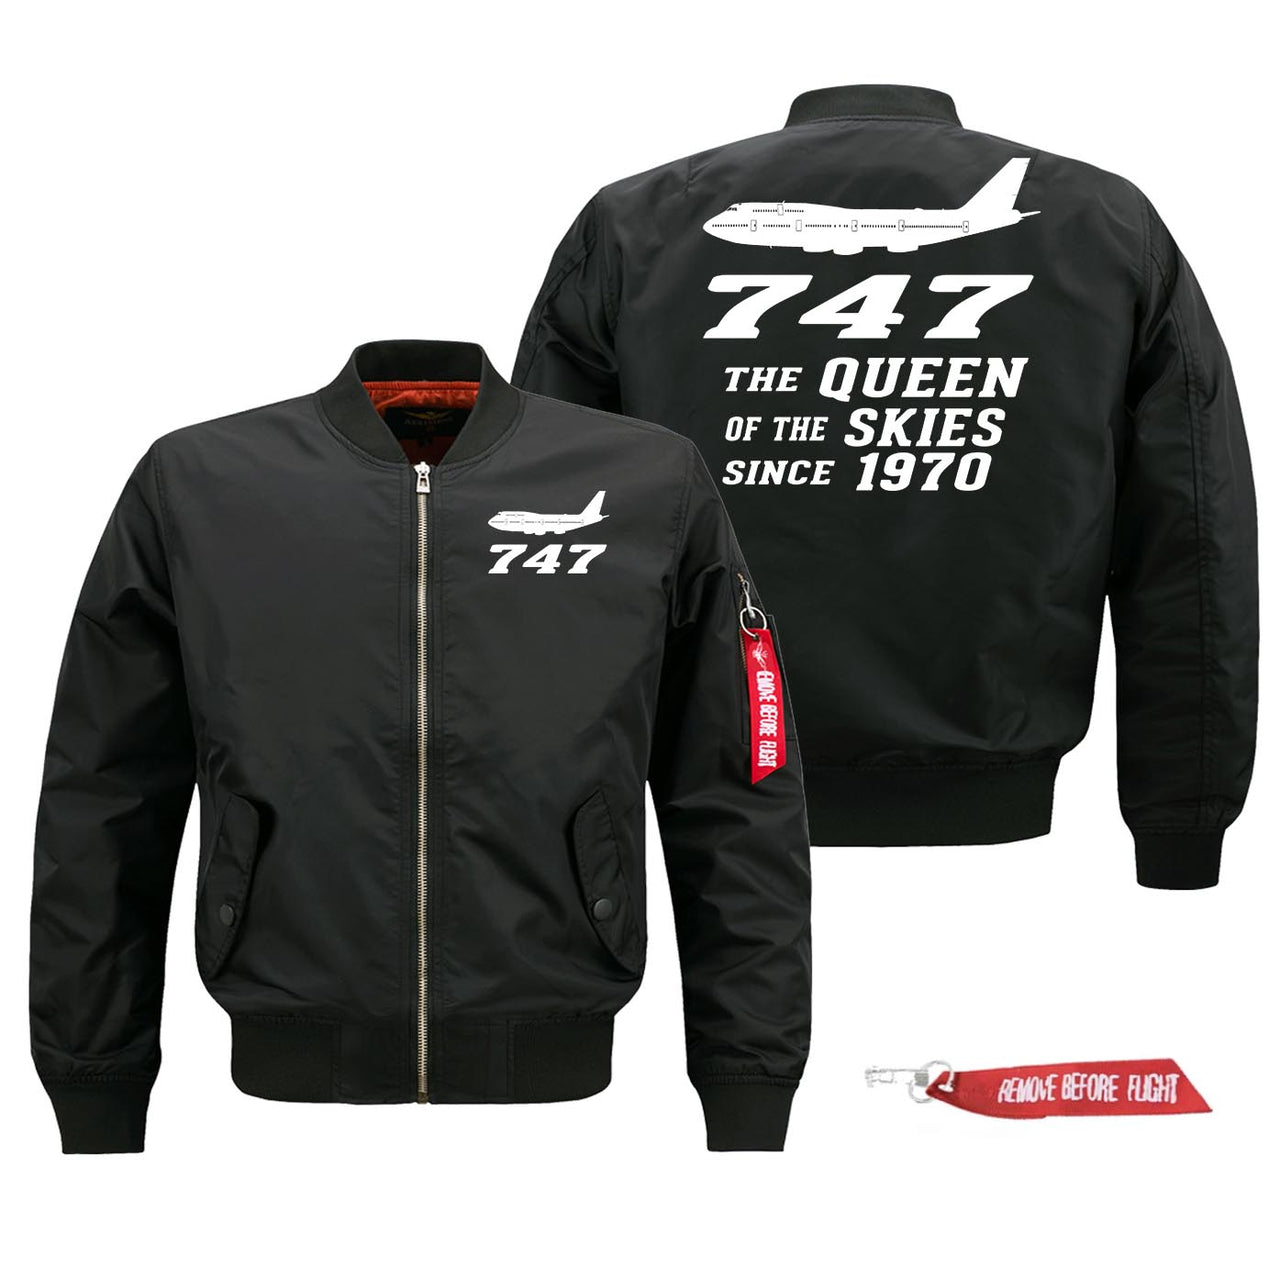 Boeing 747 Queen of The Skies (2) Designed Pilot Jackets (Customizable)